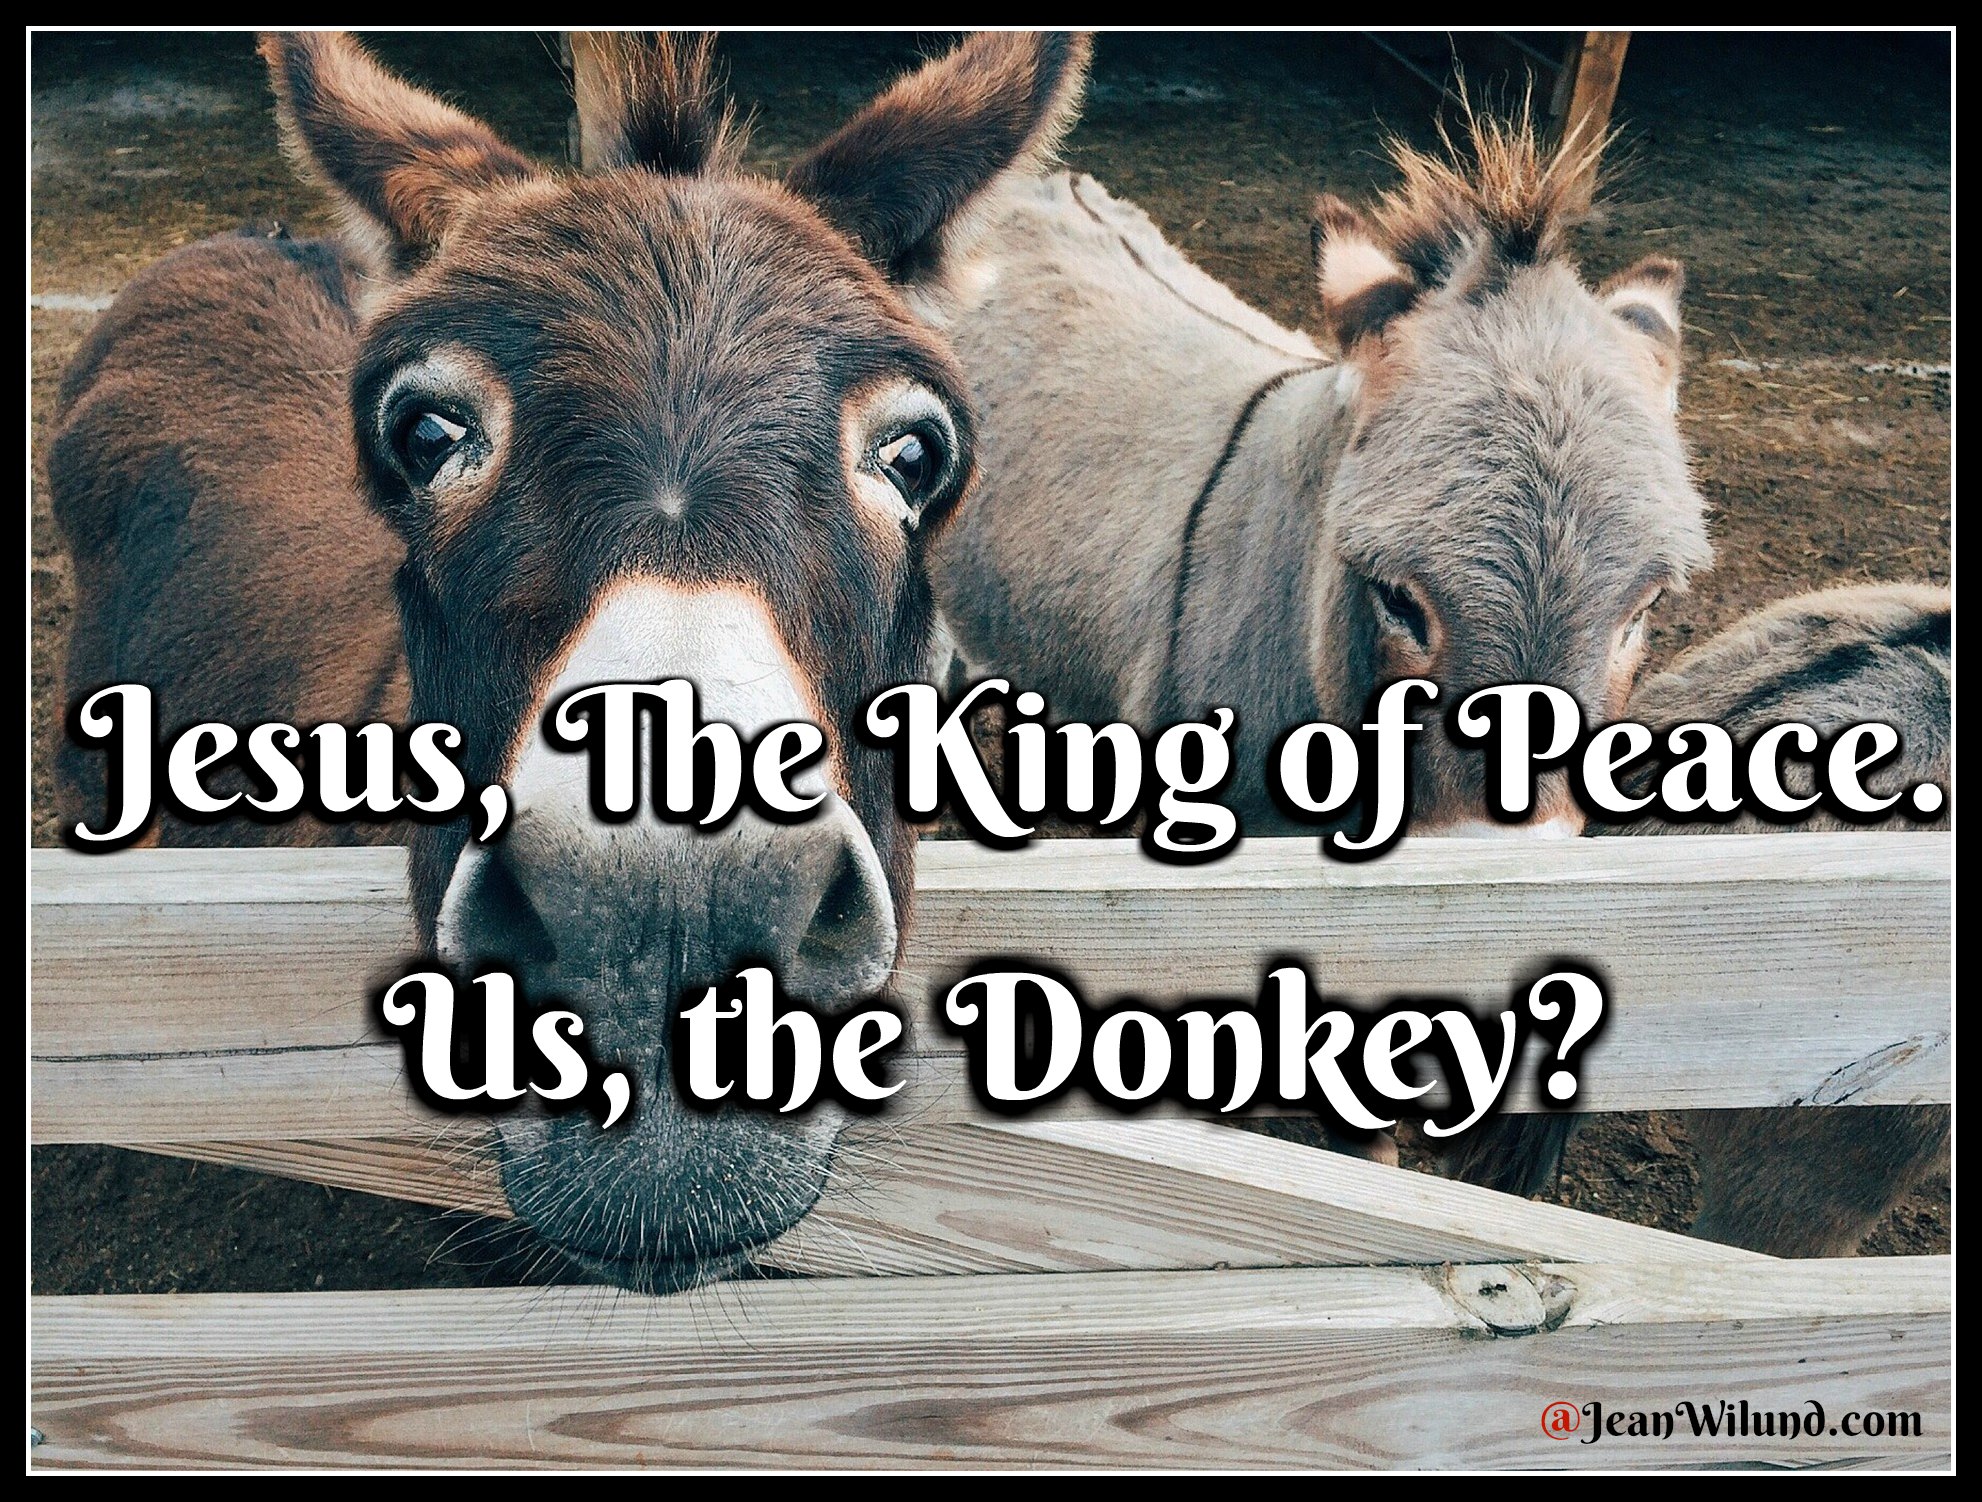 Easter ~ Jesus, the King of Peace. Us, the Donkey? Lessons from Christ at Easter (via @JeanWilund.com)